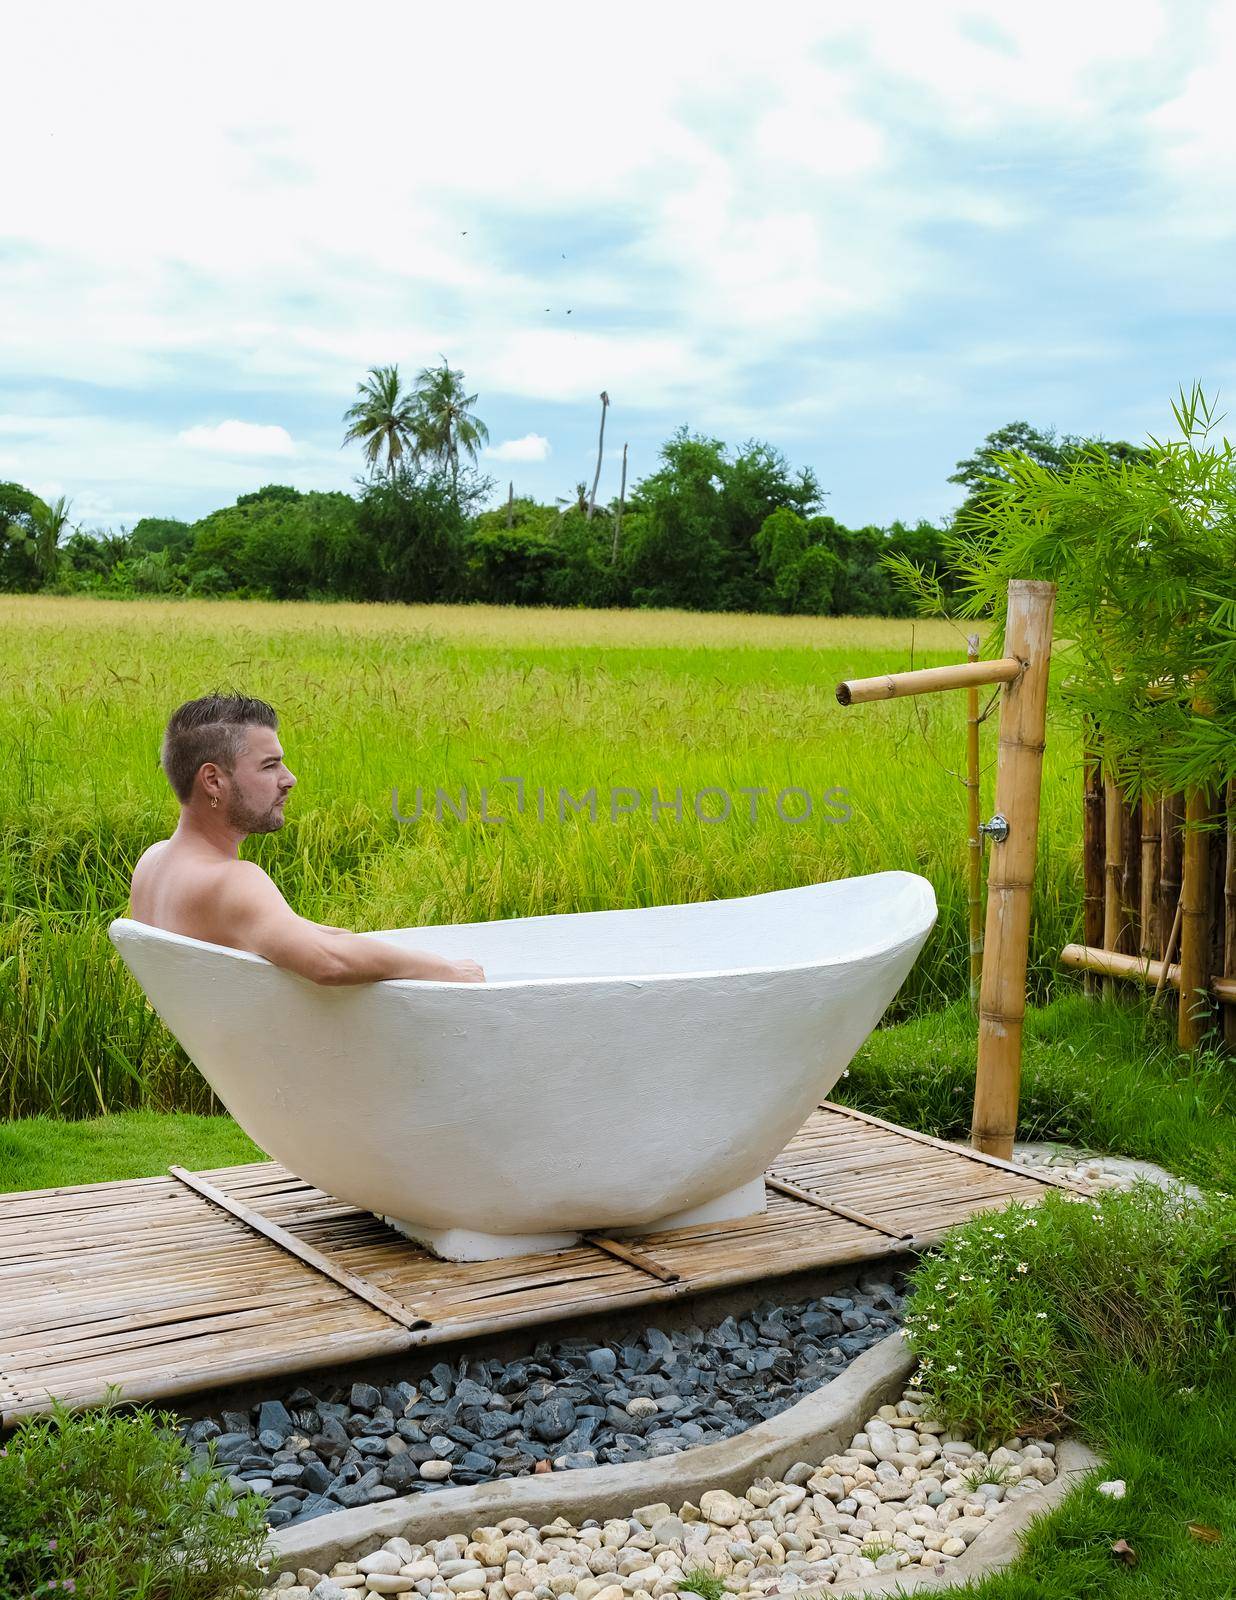 men in a white bathtub outside looking out over a green rice field, men and women in bath tub outside on vacation at a homestay in Thailand with green rice paddy field